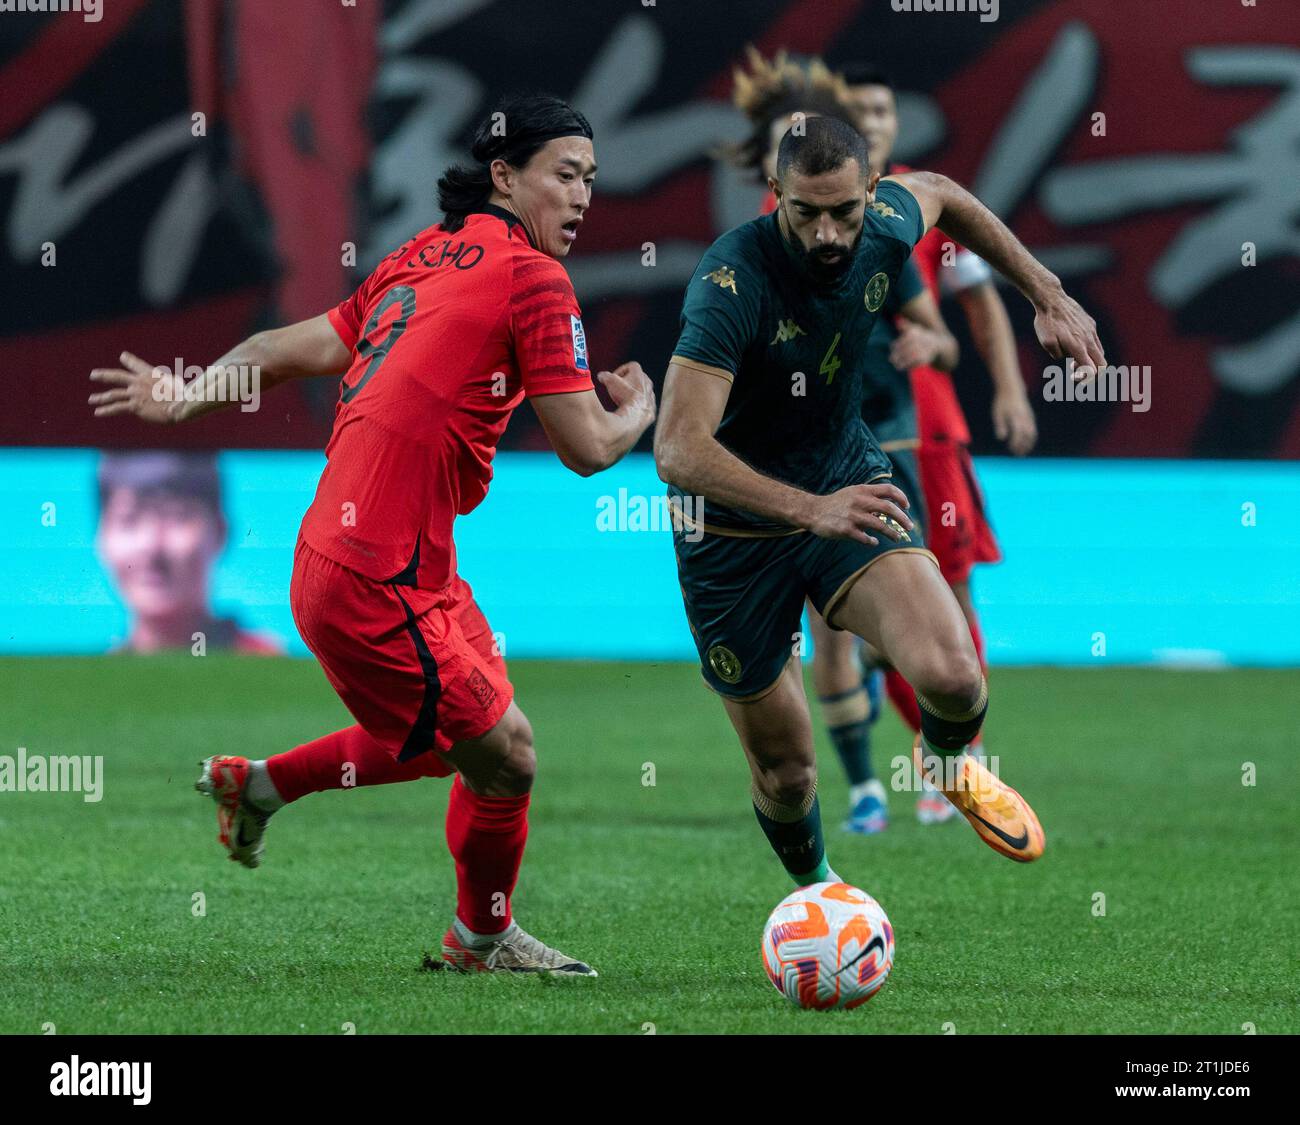 Seoul, South Korea. 13th Oct, 2023. South Korean player Cho Gue-sung (9), dribbles the ball with Yassine Meriah (4), of Tunisia during the friendly soccer match between South Korea and Tunisia at the Seoul World Cup Stadium in Seoul, South Korea on October 13, 2023. (Photo by Lee Young-ho/Sipa USA) Credit: Sipa USA/Alamy Live News Stock Photo